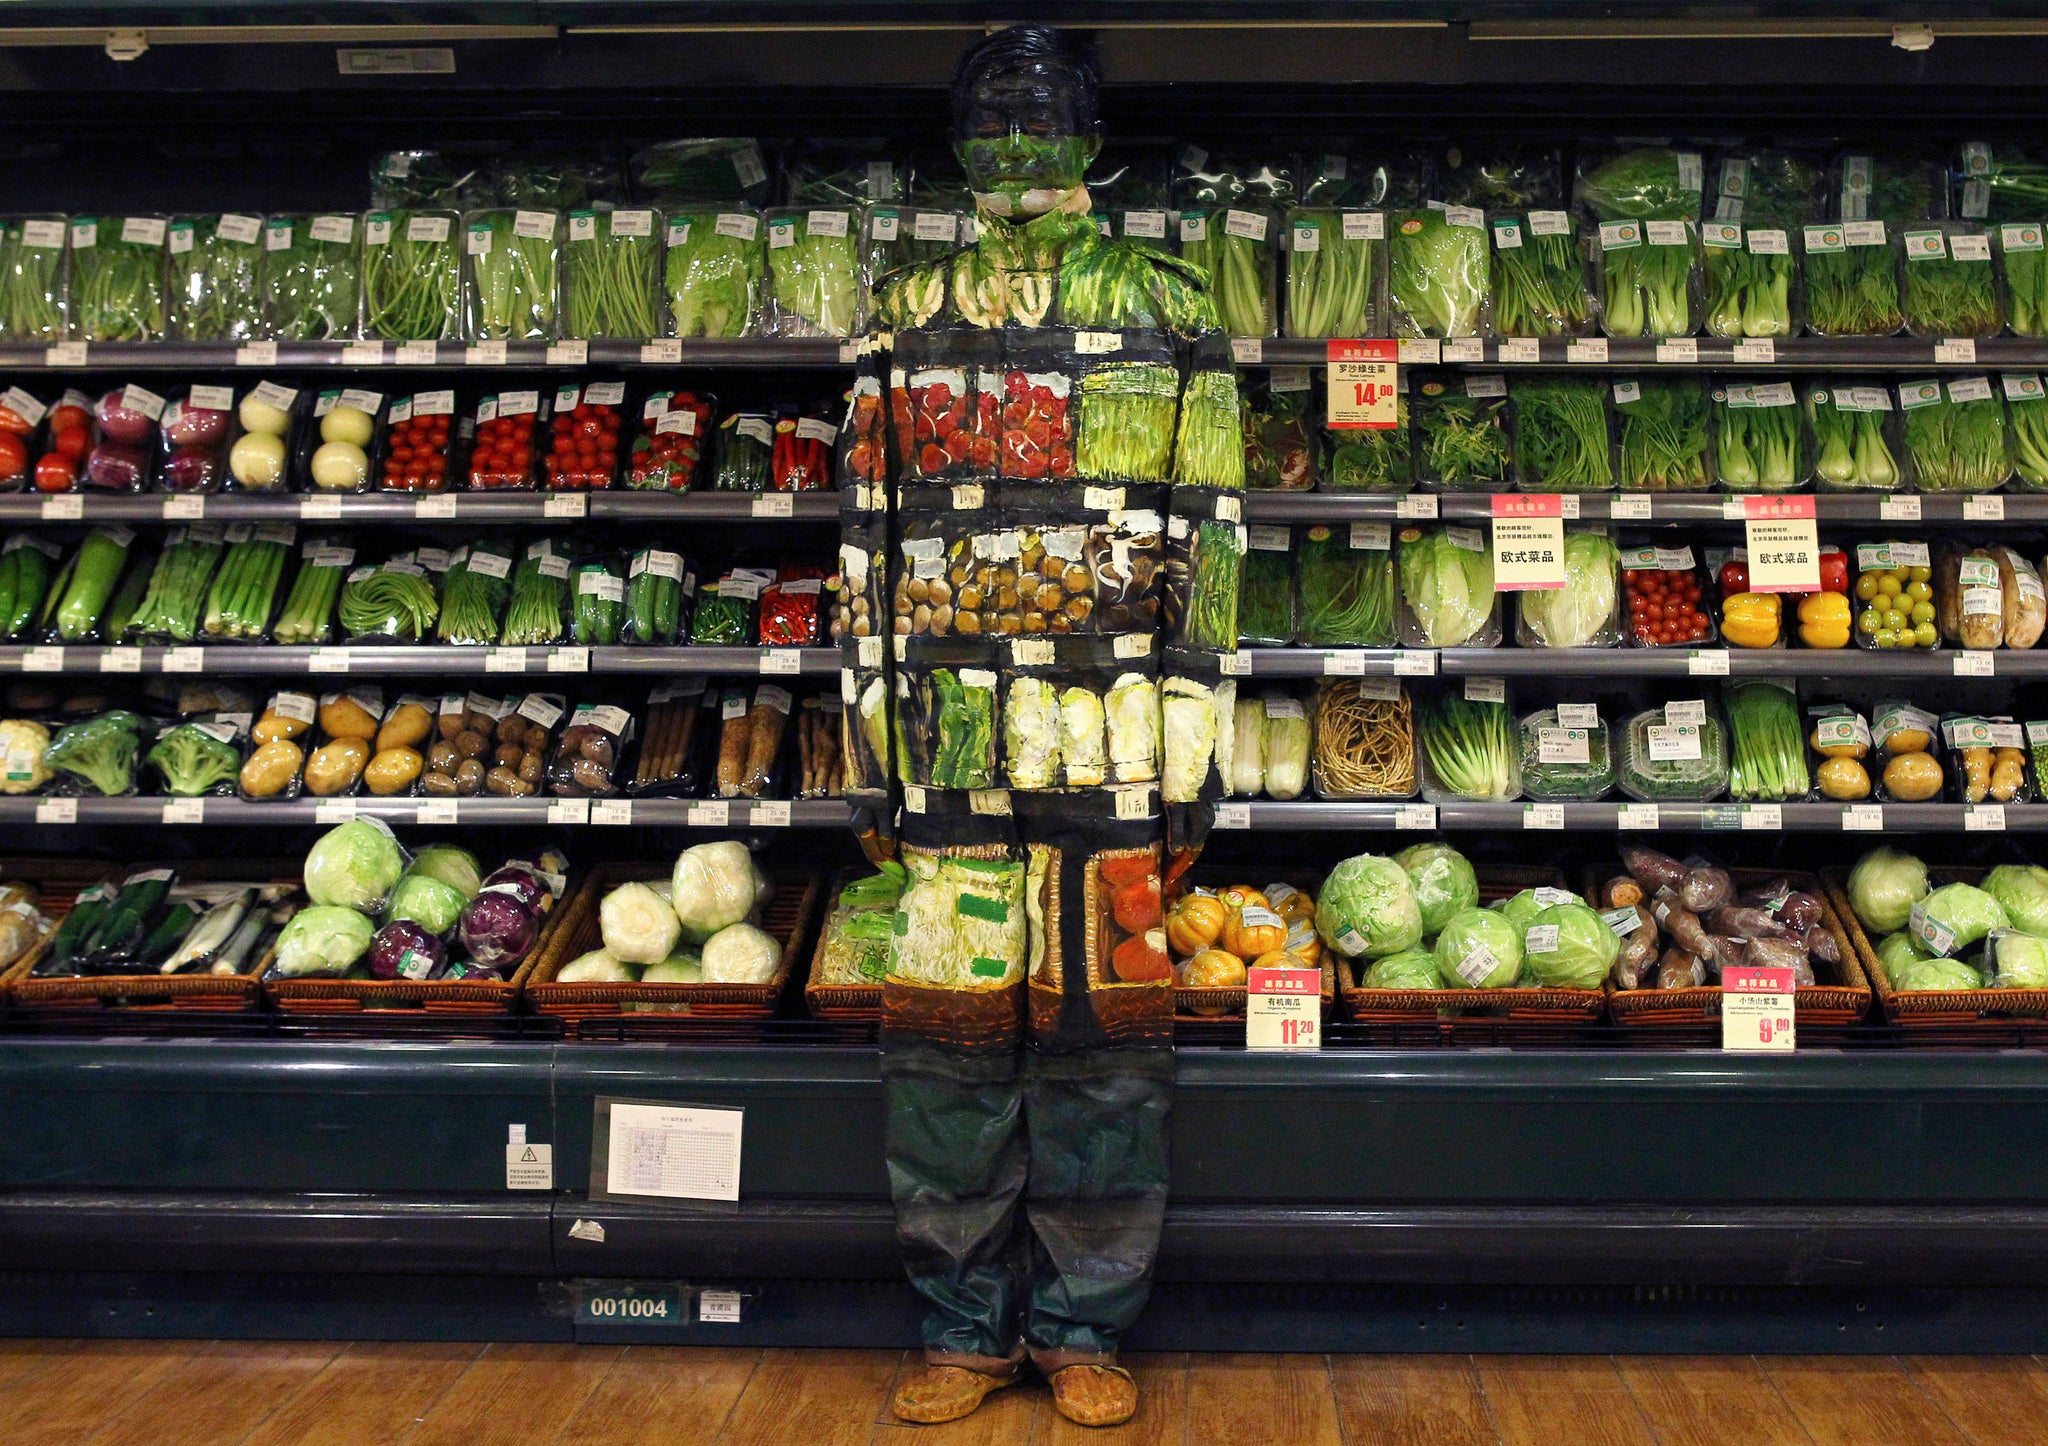 Artist Liu Bolin, also known as the 'Vanishing Artist,' demonstrates an art installation by blending in with vegetables displayed on the shelves at a supermarket in Beijing.